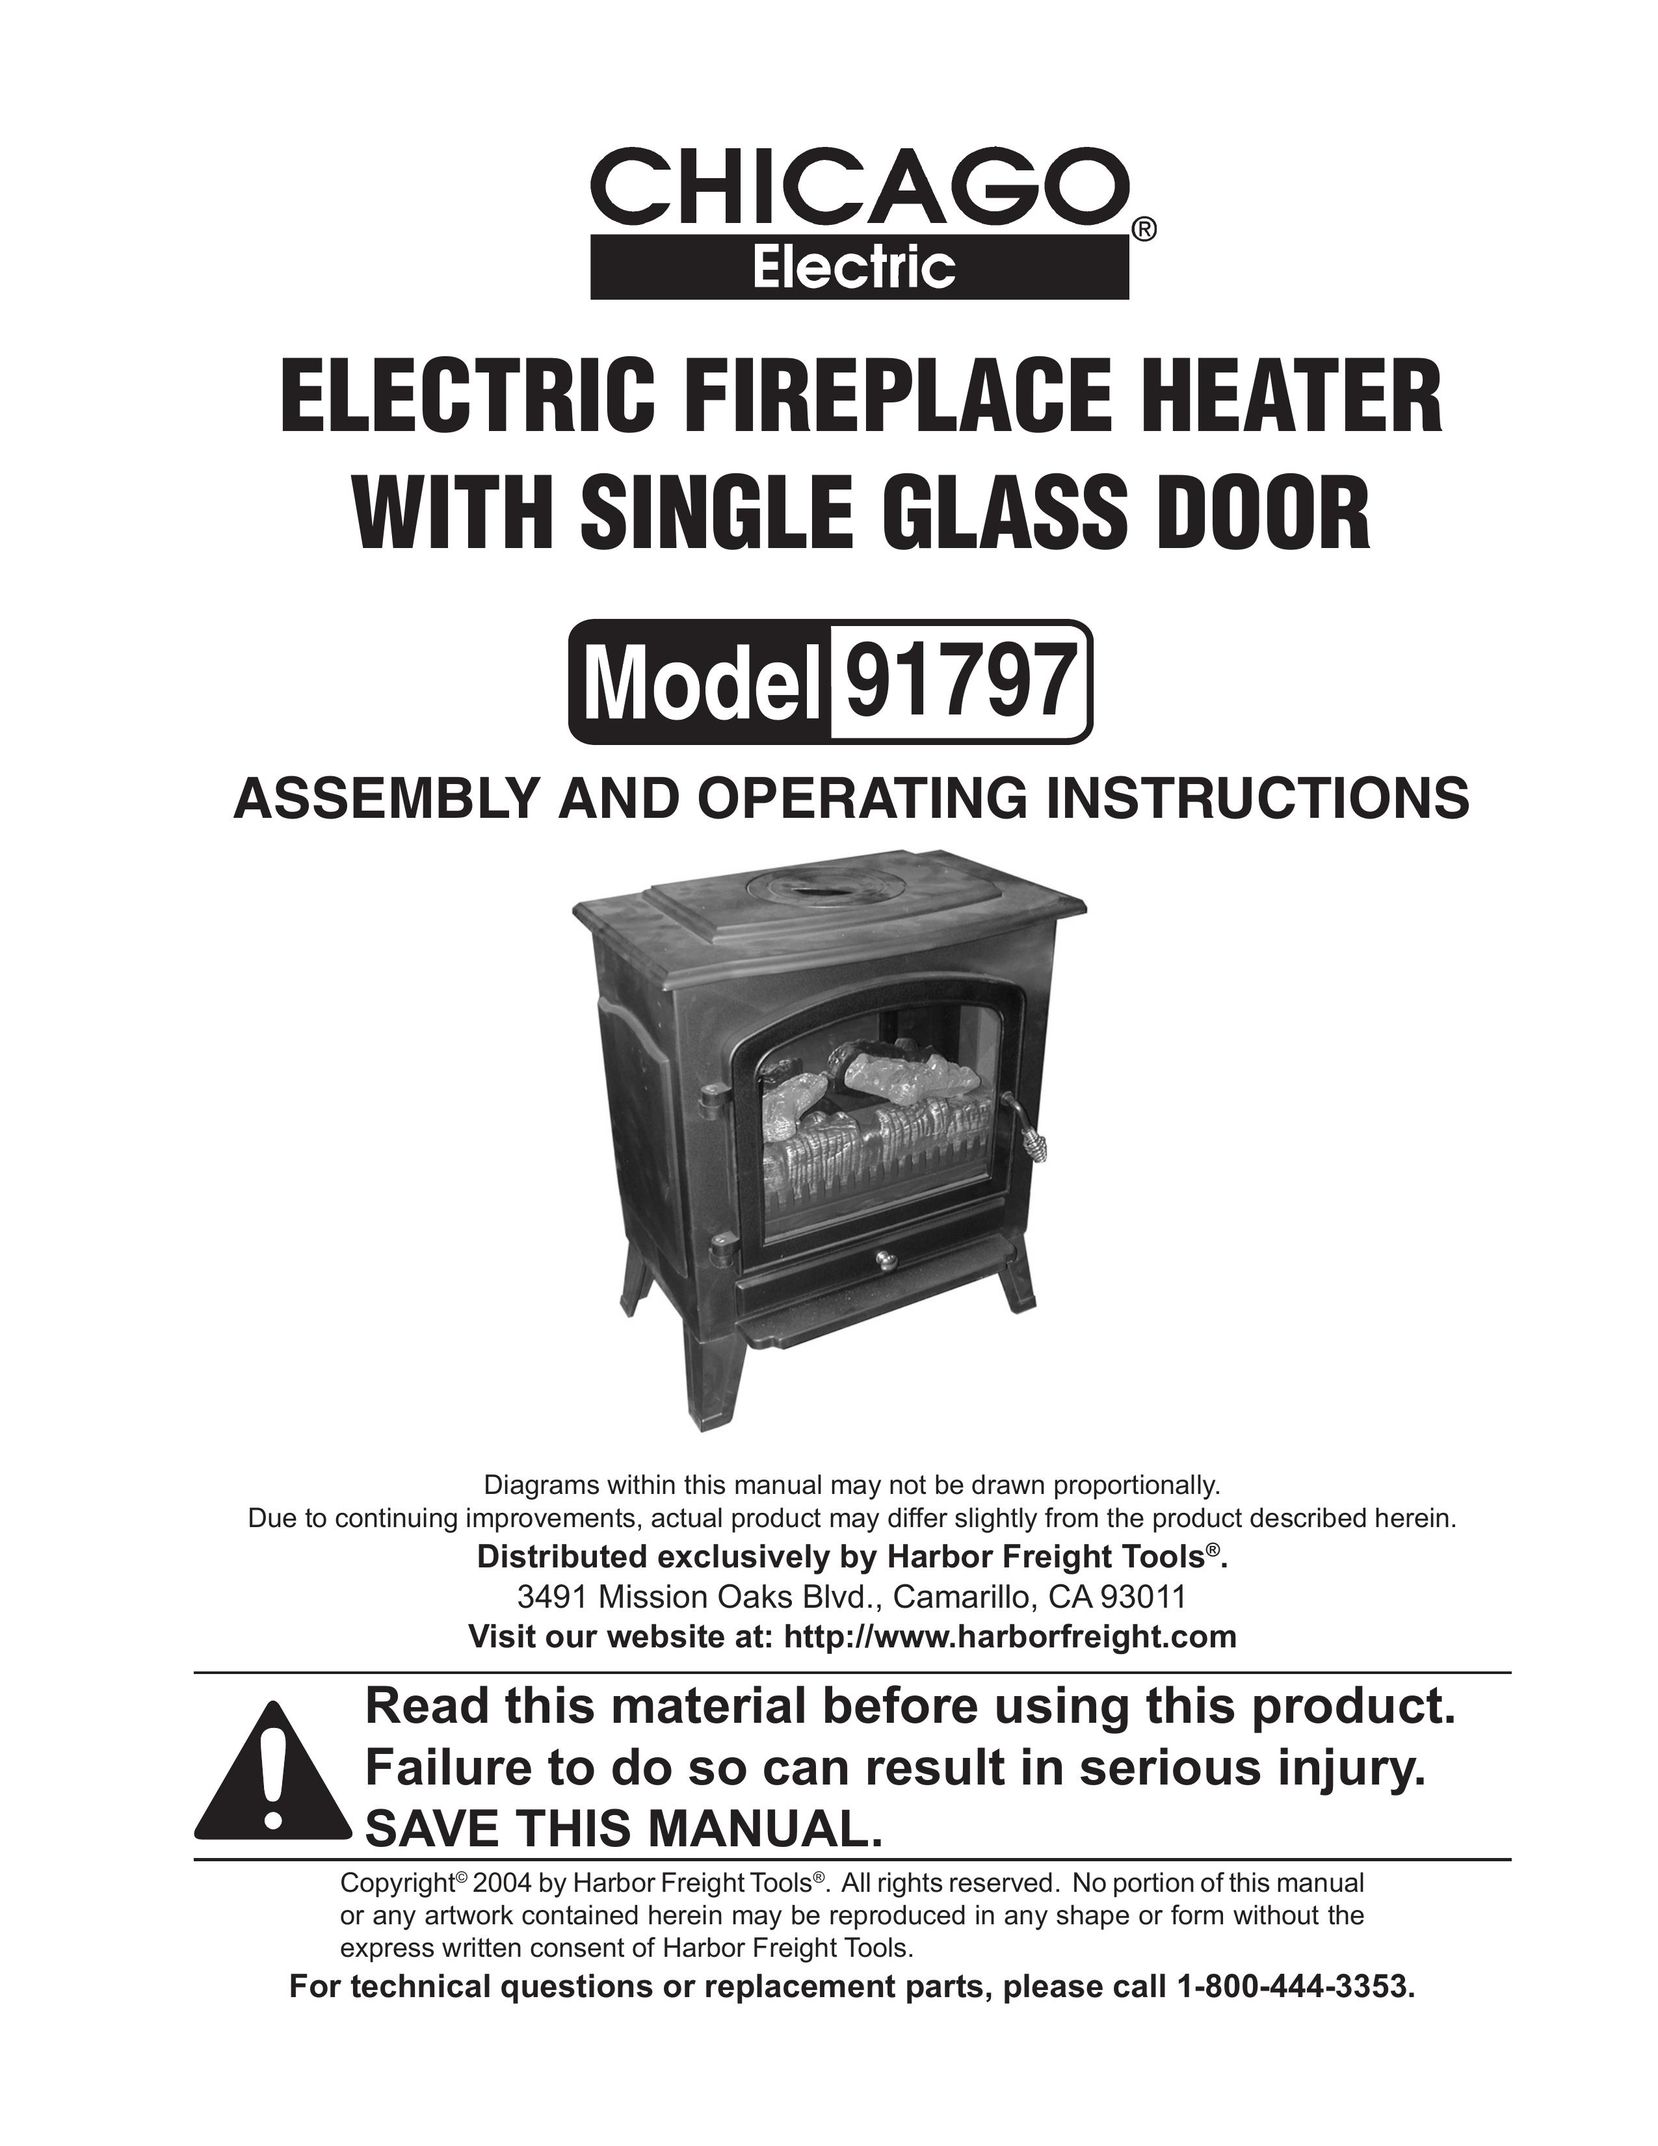 Chicago Electric ELECTRIC FIREPLACE HEATER WITH SINGLE GLASS DOOR Indoor Fireplace User Manual